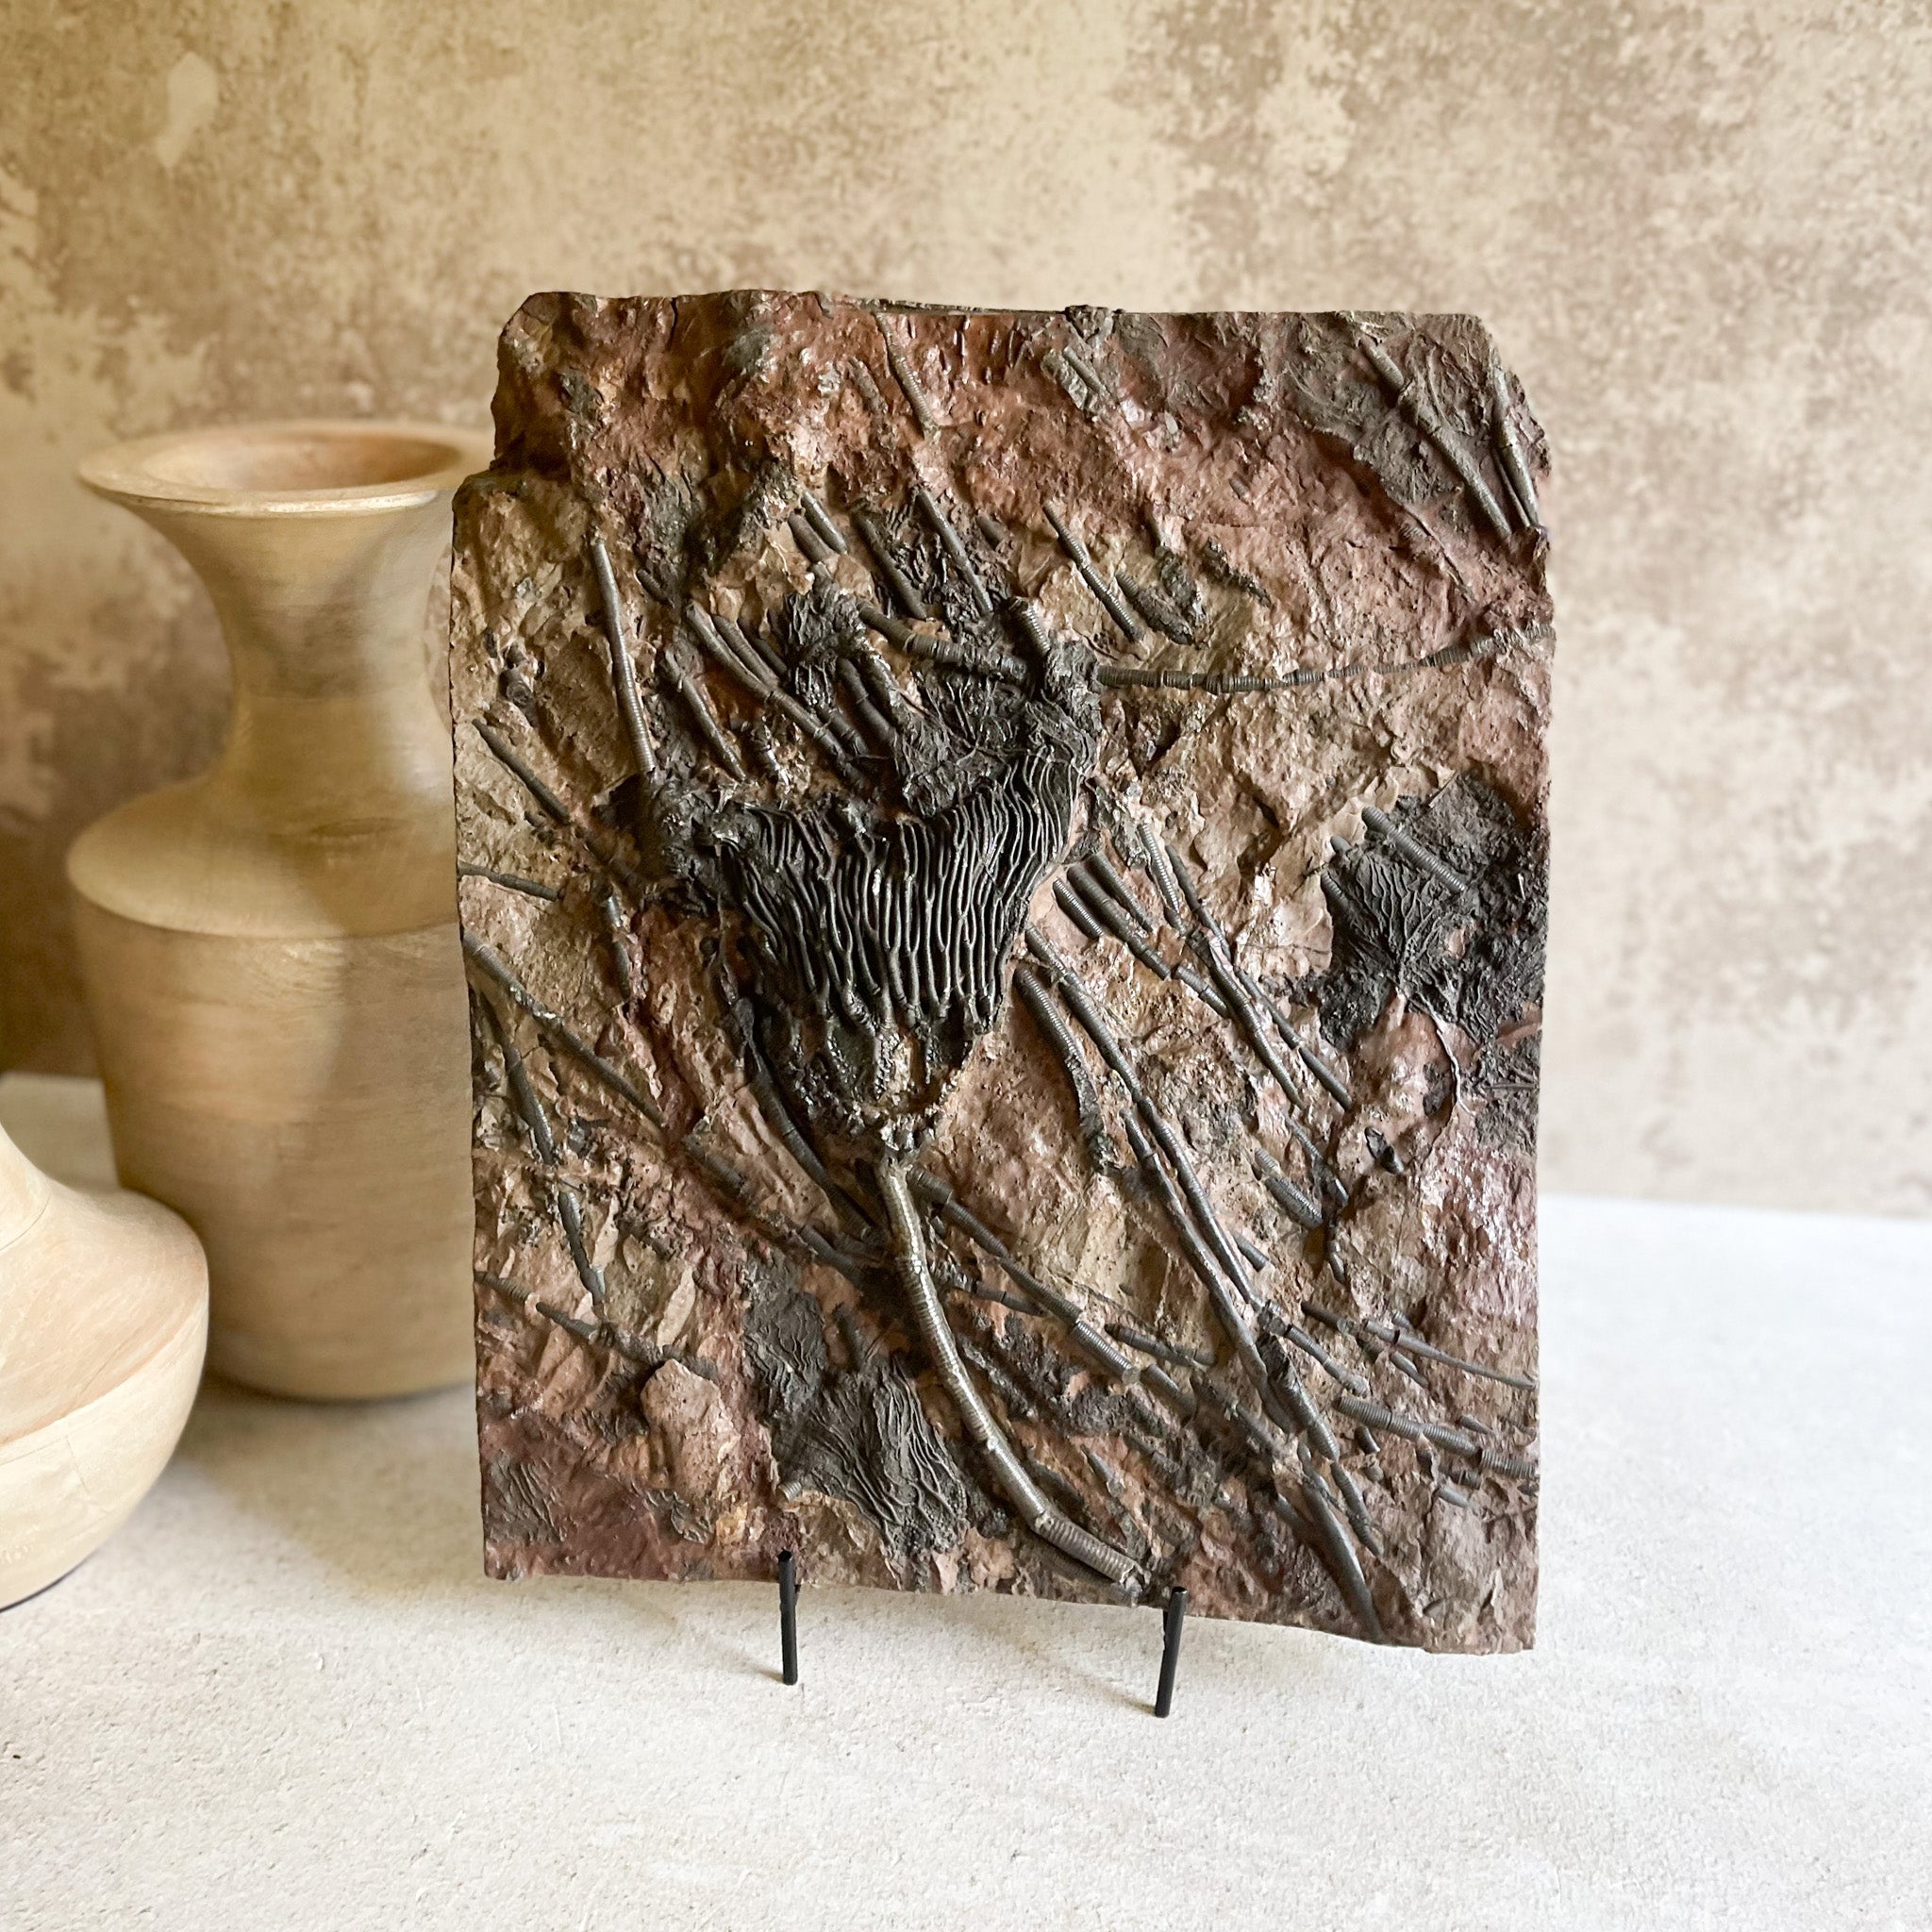 Fossil Crinoif Plaque, Fossil Sea Lily, Marine Fossil